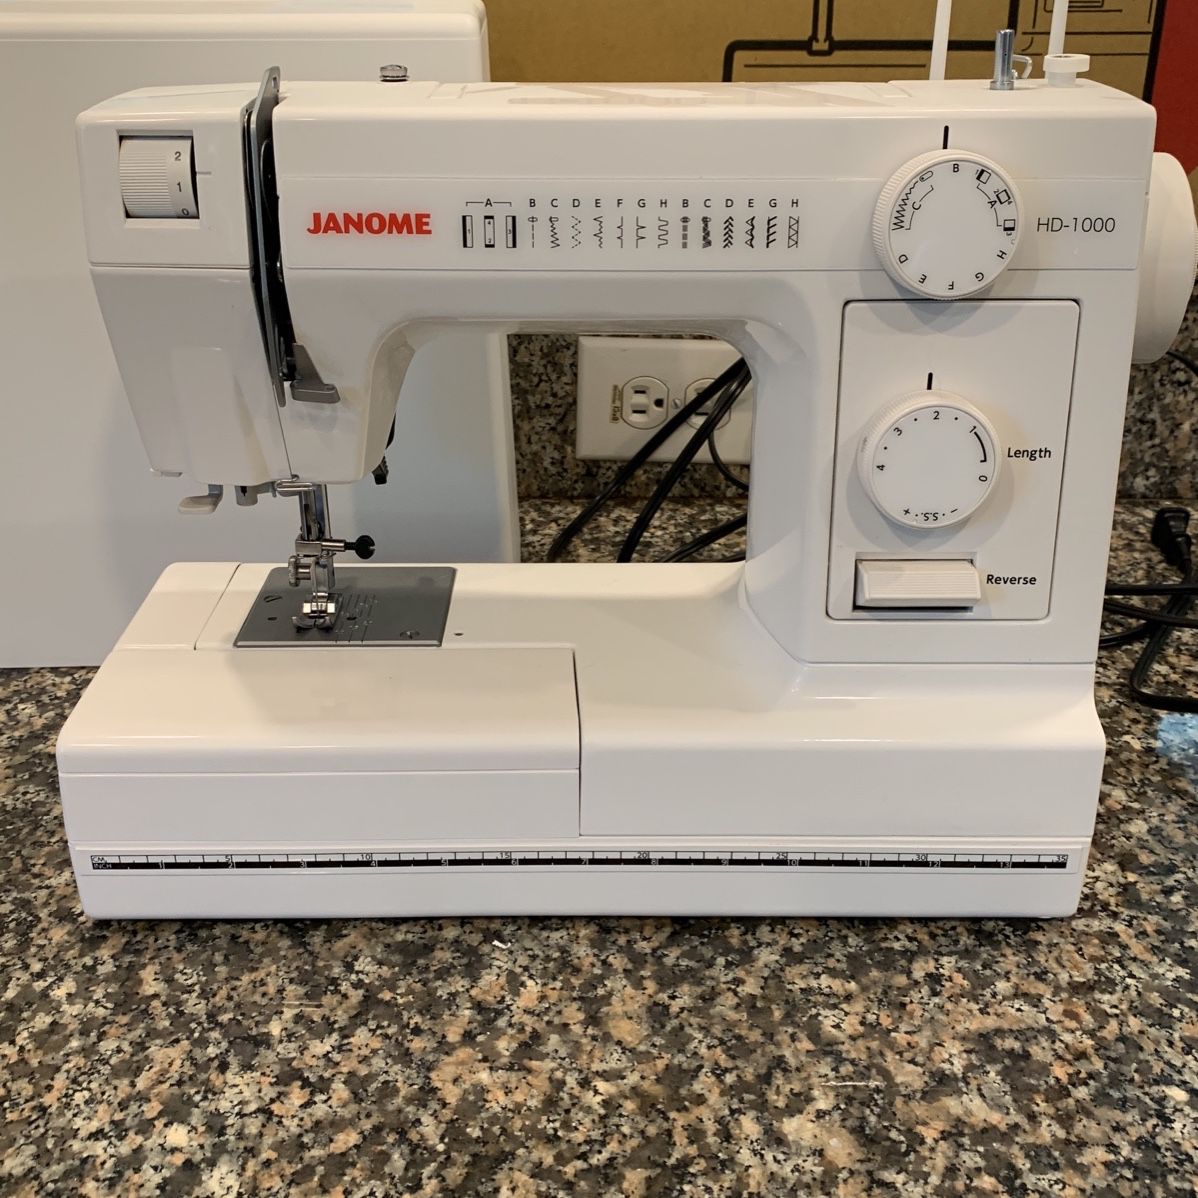 Sewing Machine Janome HD-1000 Model 731LE 0.7A for Sale in Wesley Chapel,  FL - OfferUp